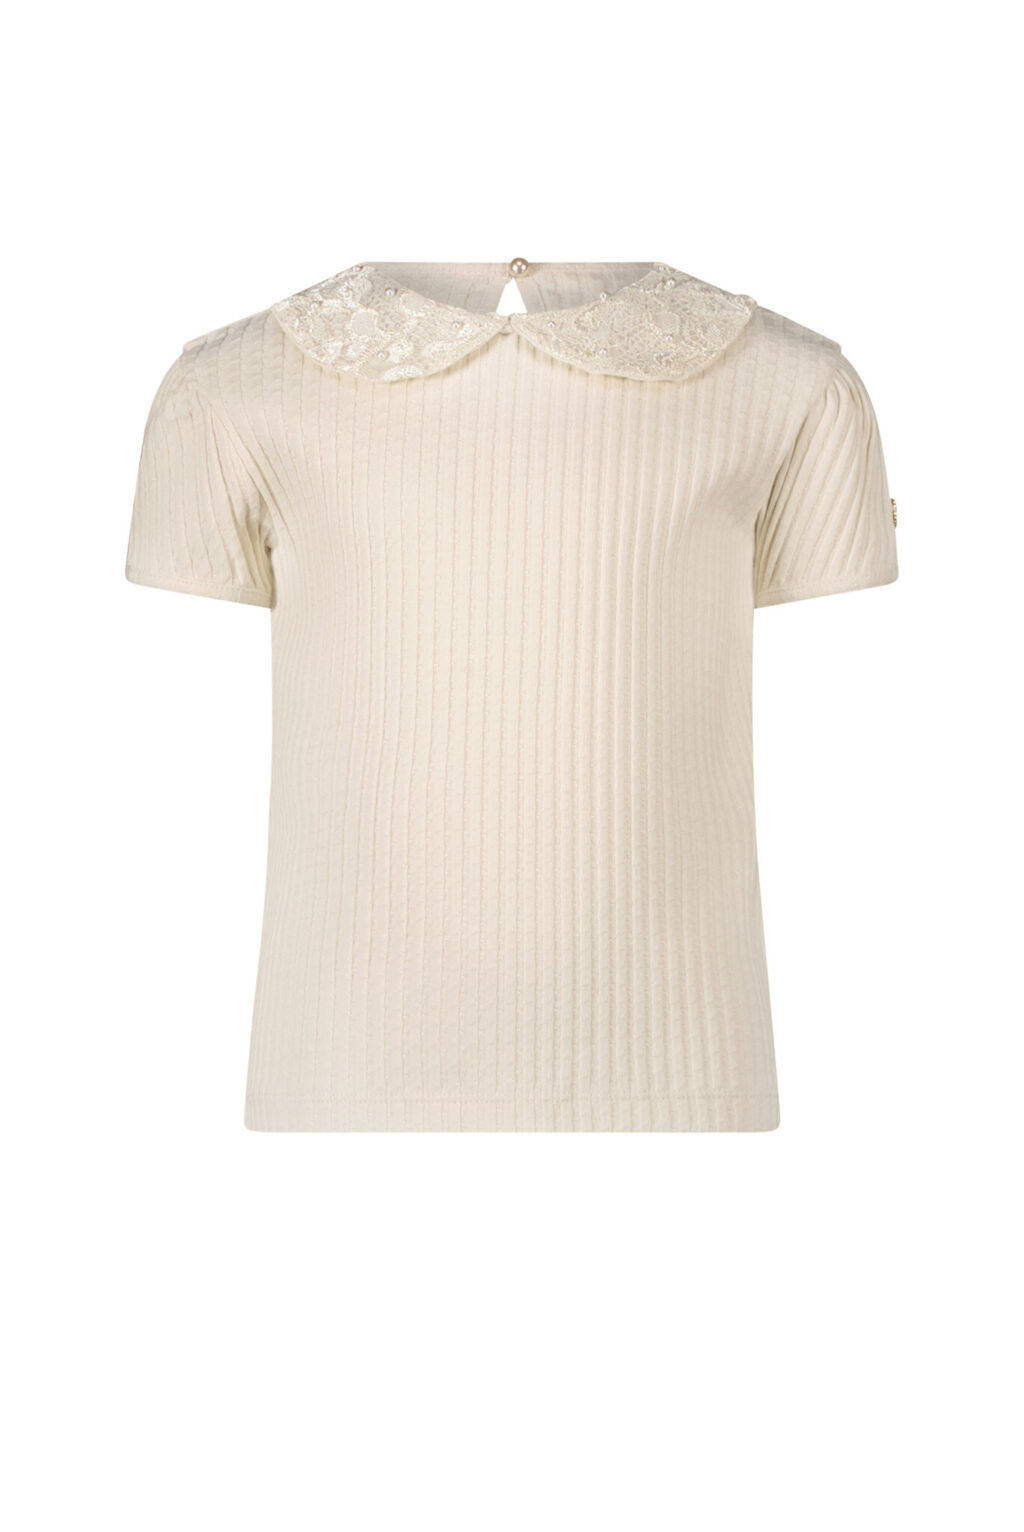 Le Chic Meisjes t-shirt - Narly - Oatmeal Elite ~ Spinze.nl